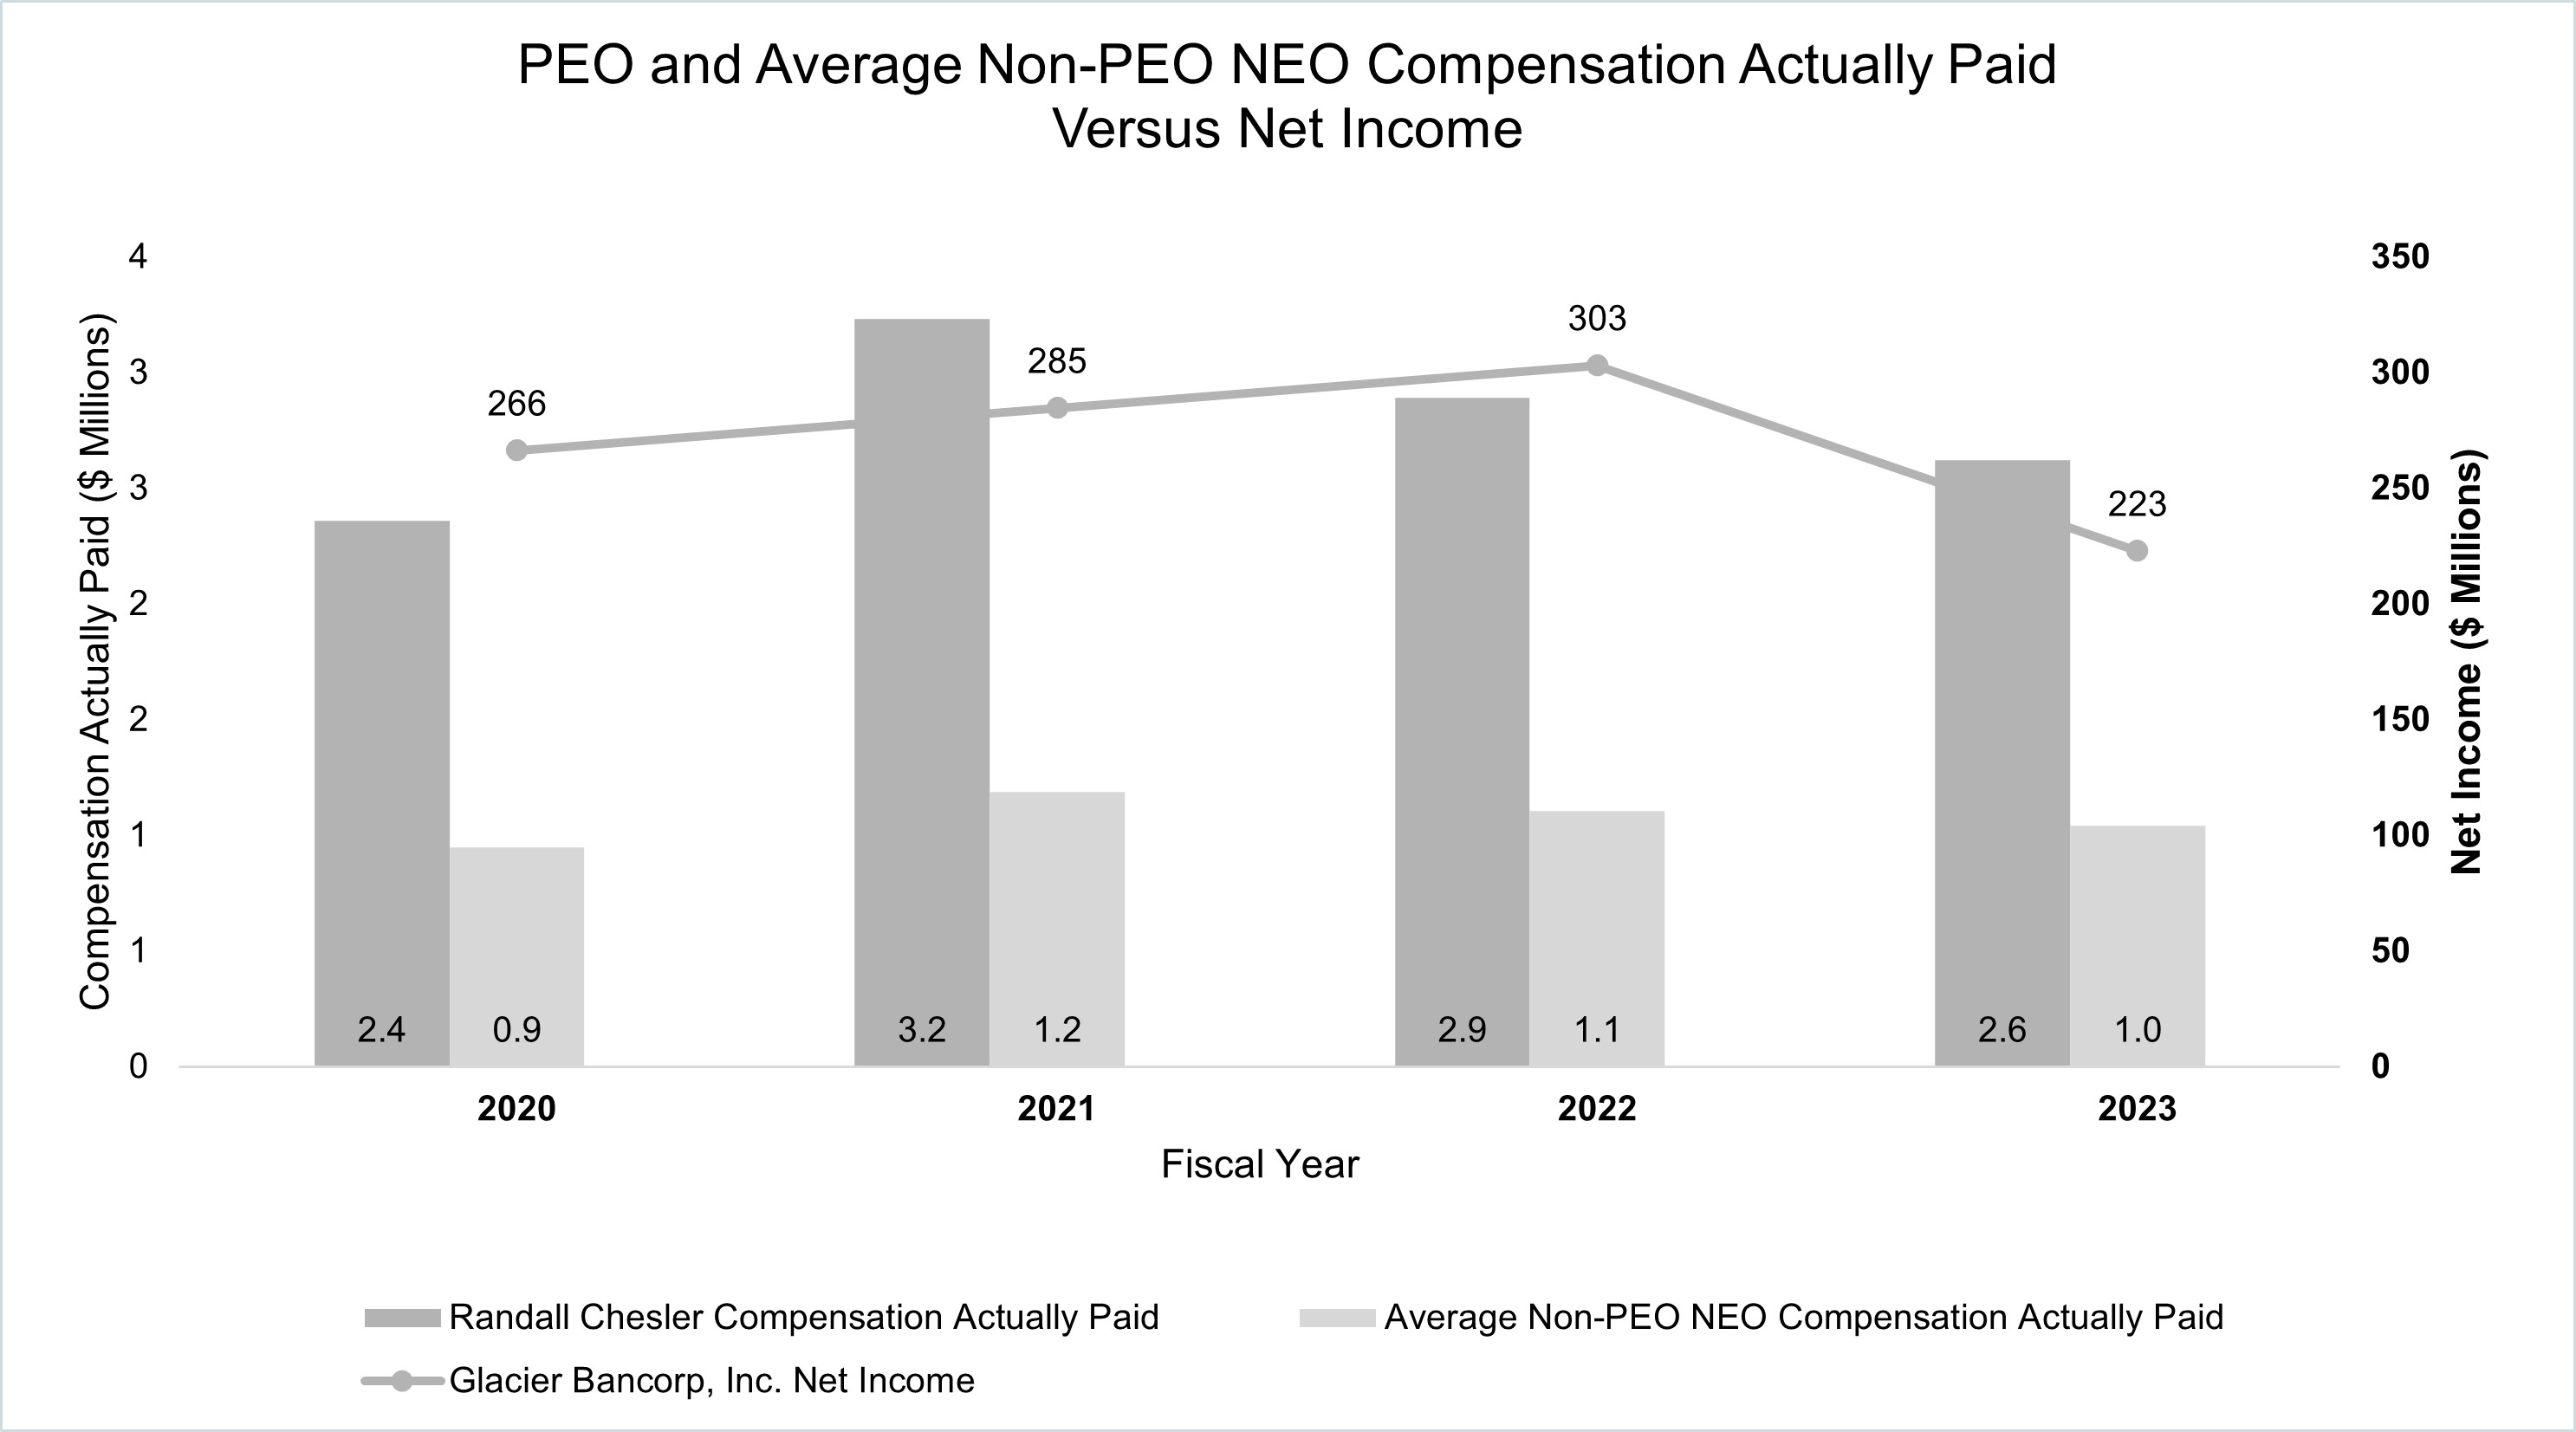 PEO and Average Non-PEO NEO Compensation Actually Paid vs Net Income bw.jpg